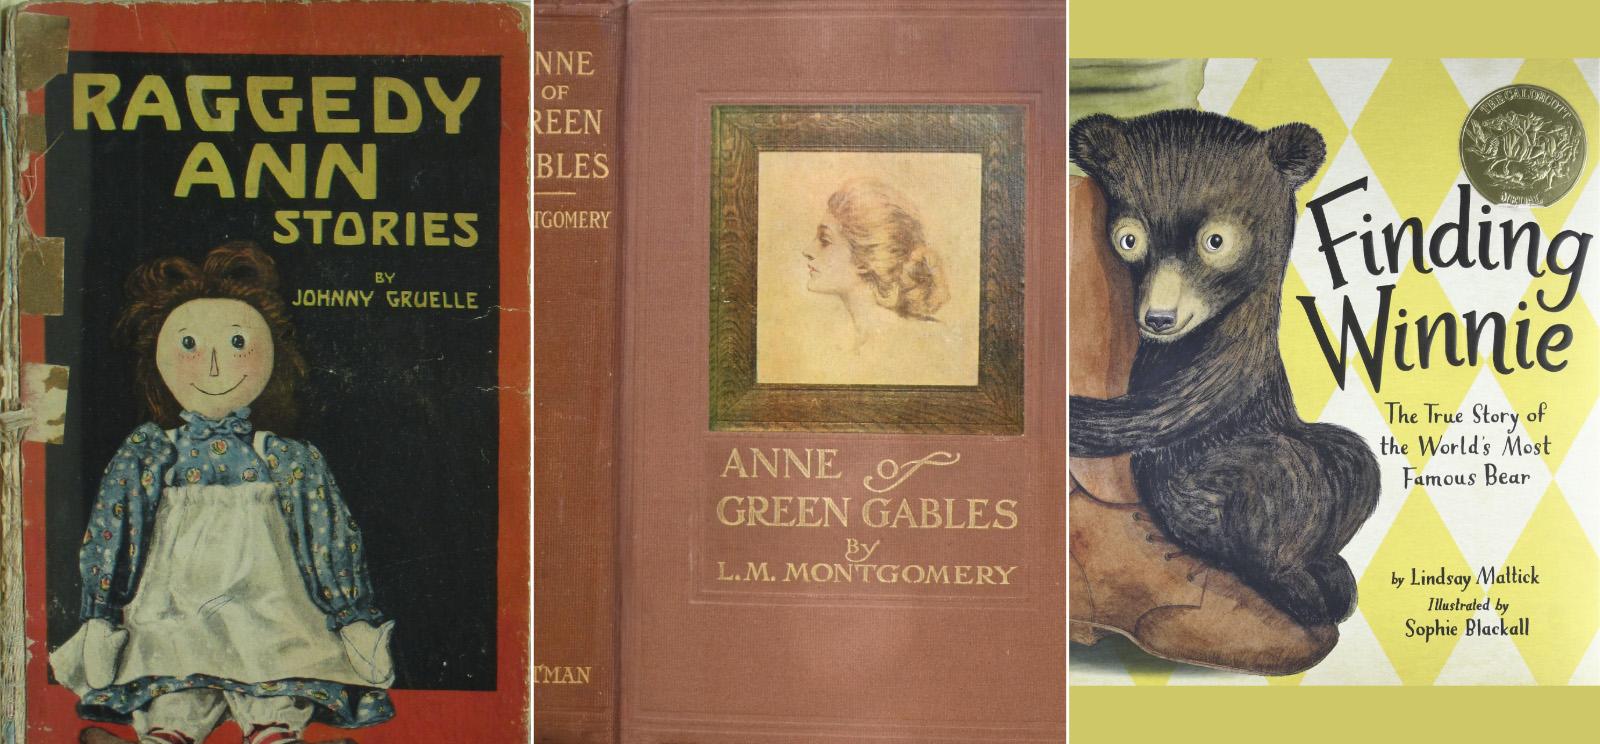 Left image: old patched-up book cover illustrated with a smiling rag doll wearing a blue dress and frilly apron with the text 'Raggedy Ann Stories'. Middle image: vintage book cover with a square pen and ink side profile portrait of an Edwardian-era woman with the text 'Anne of Green Gables'. Left image: modern book cover with an illustrated black bear cub hugging someone's boot with the text 'Finding Winnie'.